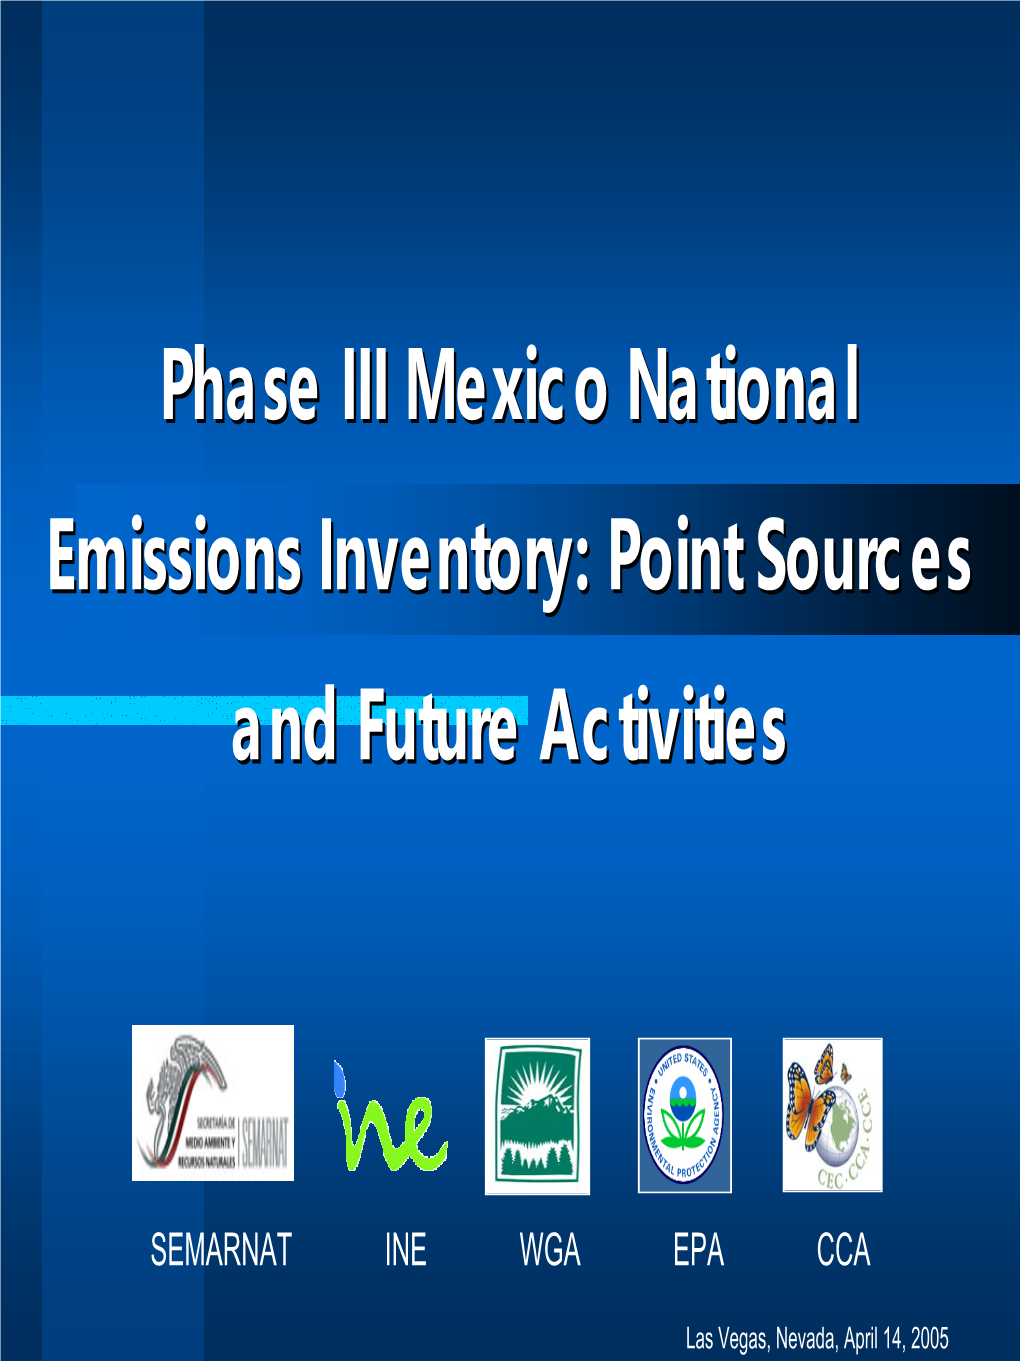 Phase III Mexico National Emissions Inventory